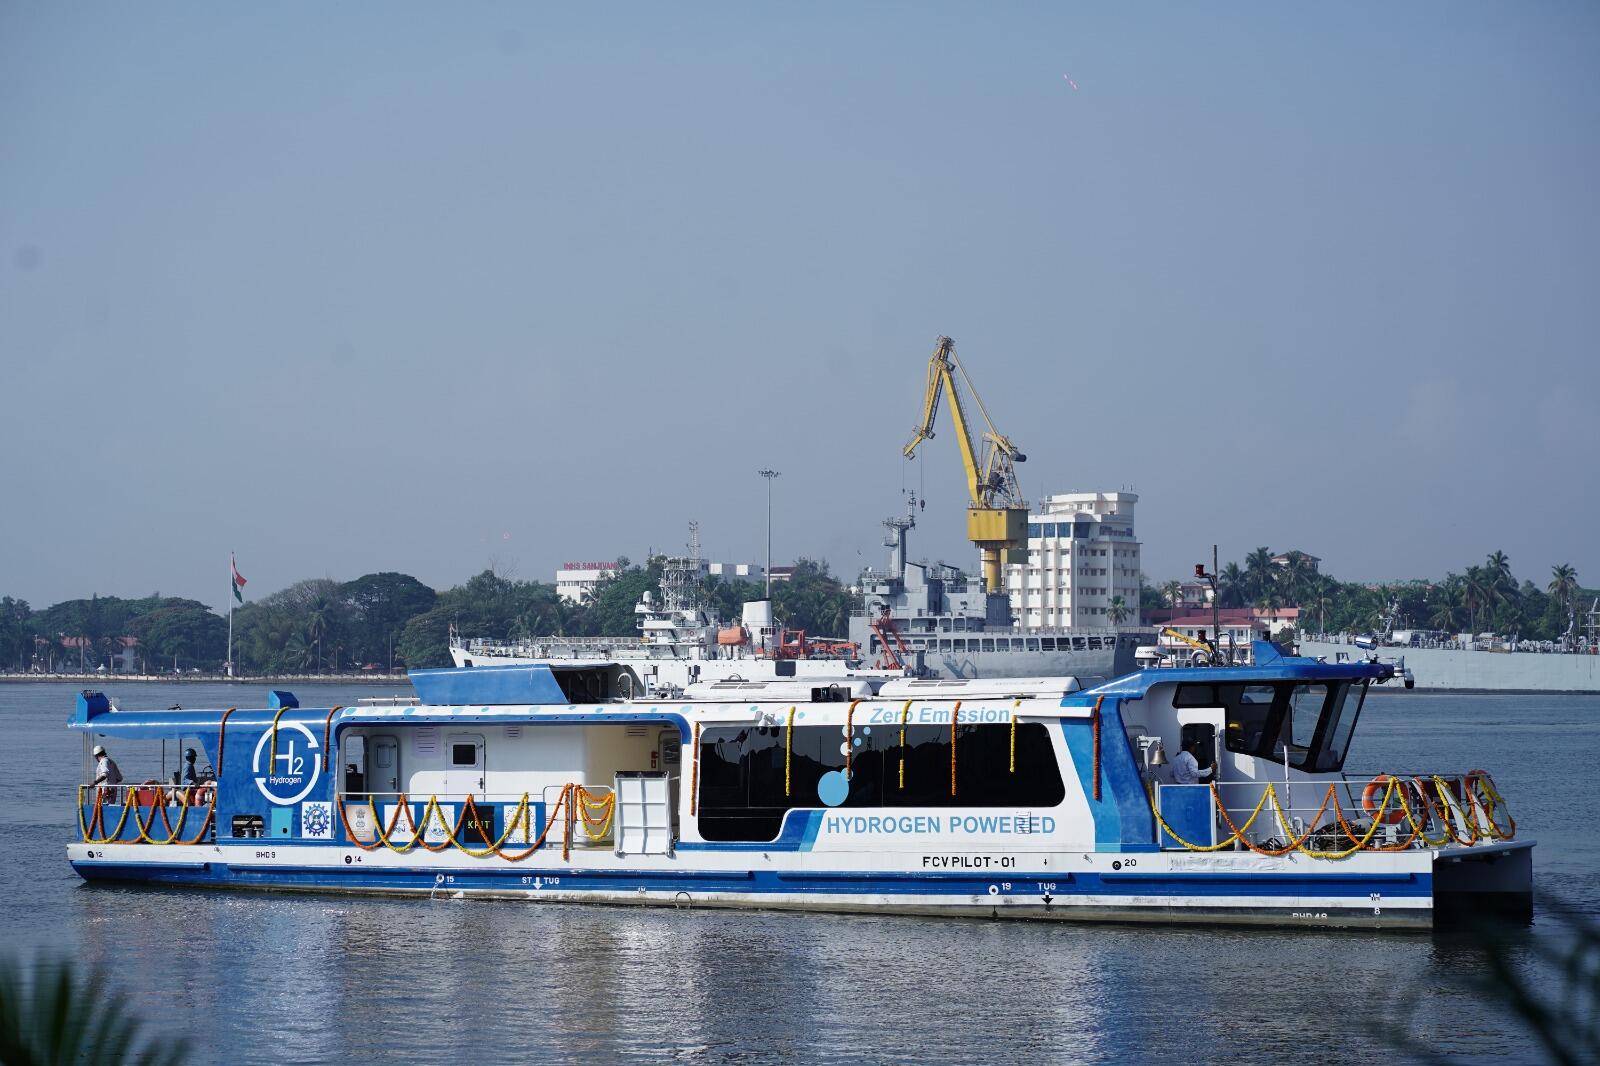 India’s First hydrogen powered ferry launched in Kochi by Prime Minister Narendra Modi